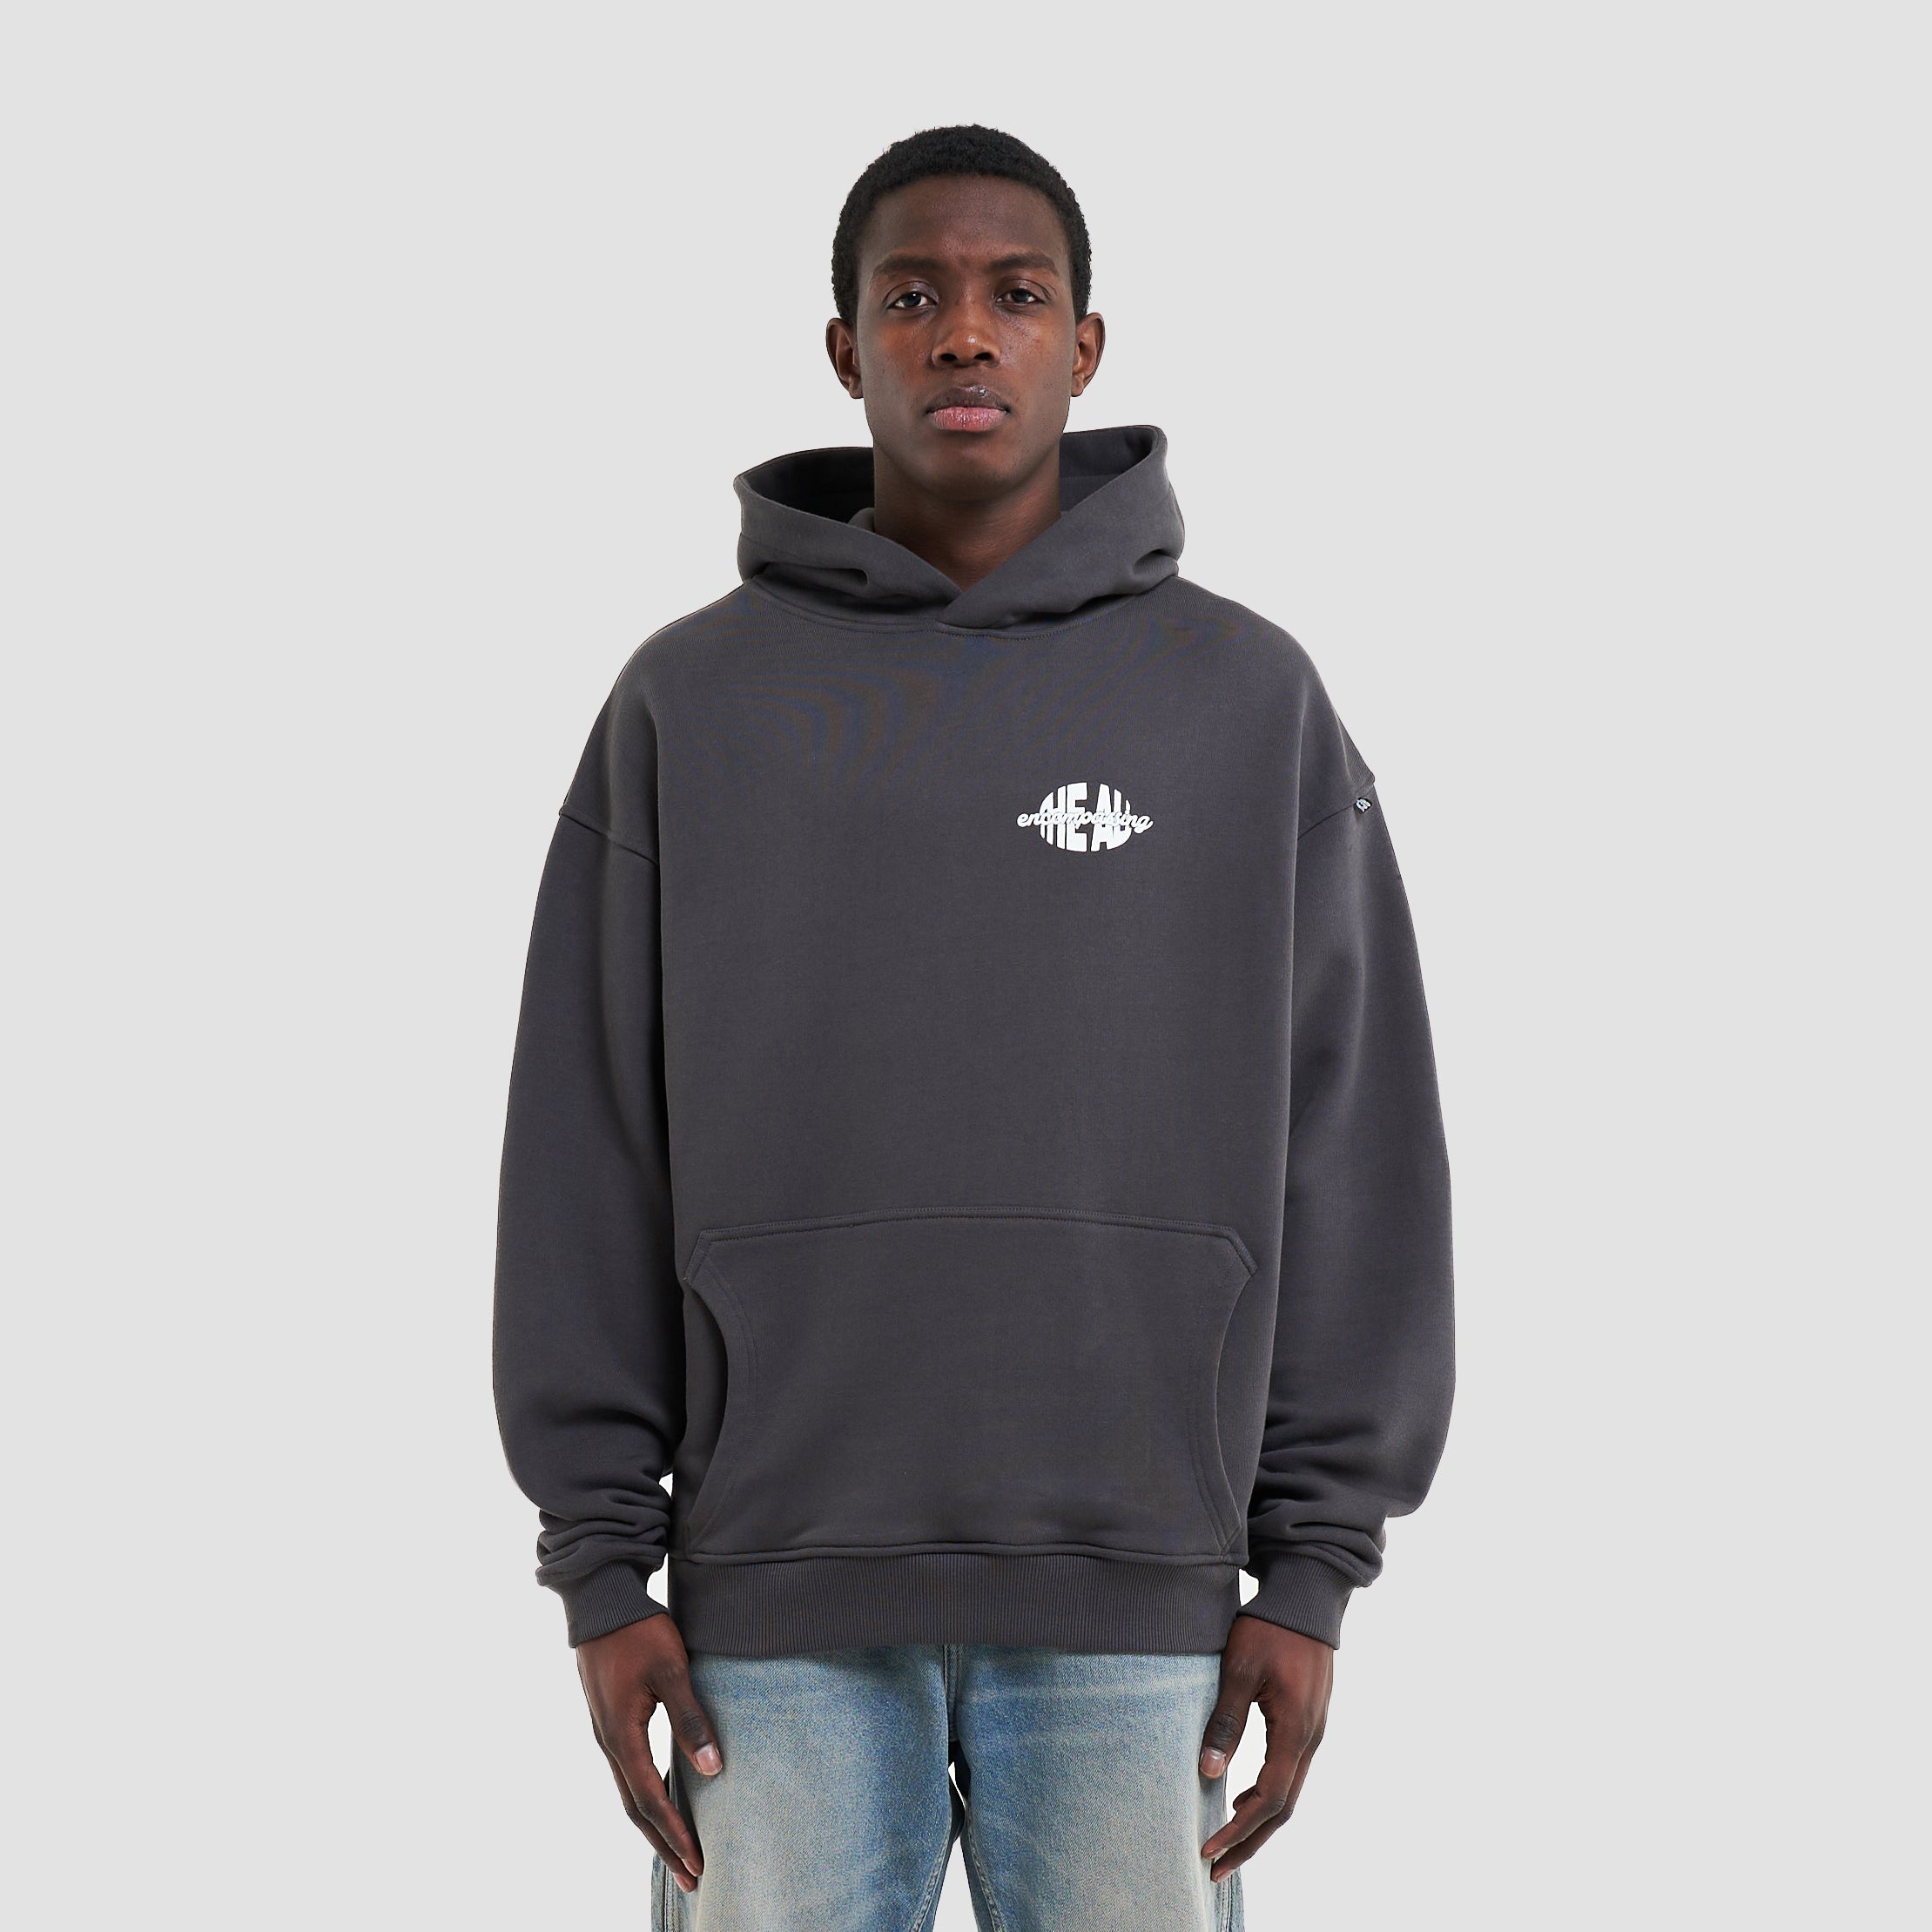 TRADING GROUP HOODIE - A3B